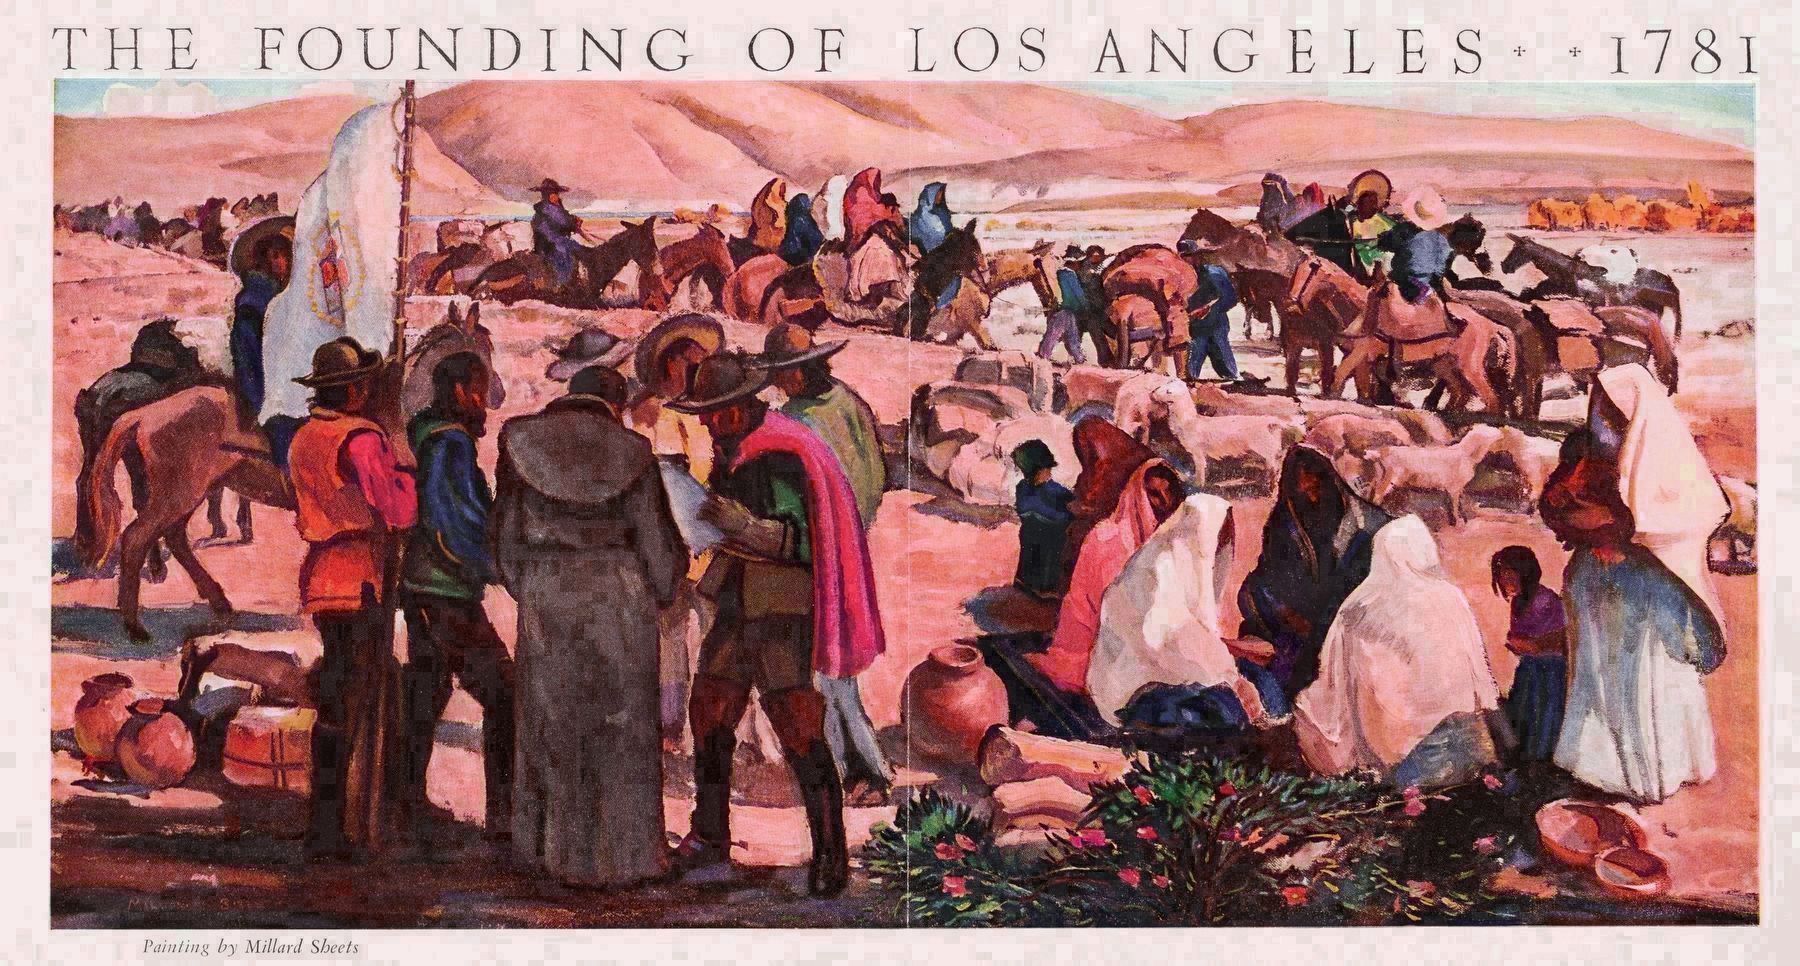 The Founding of Los Angeles by Millard Sheets image. Click for full size.